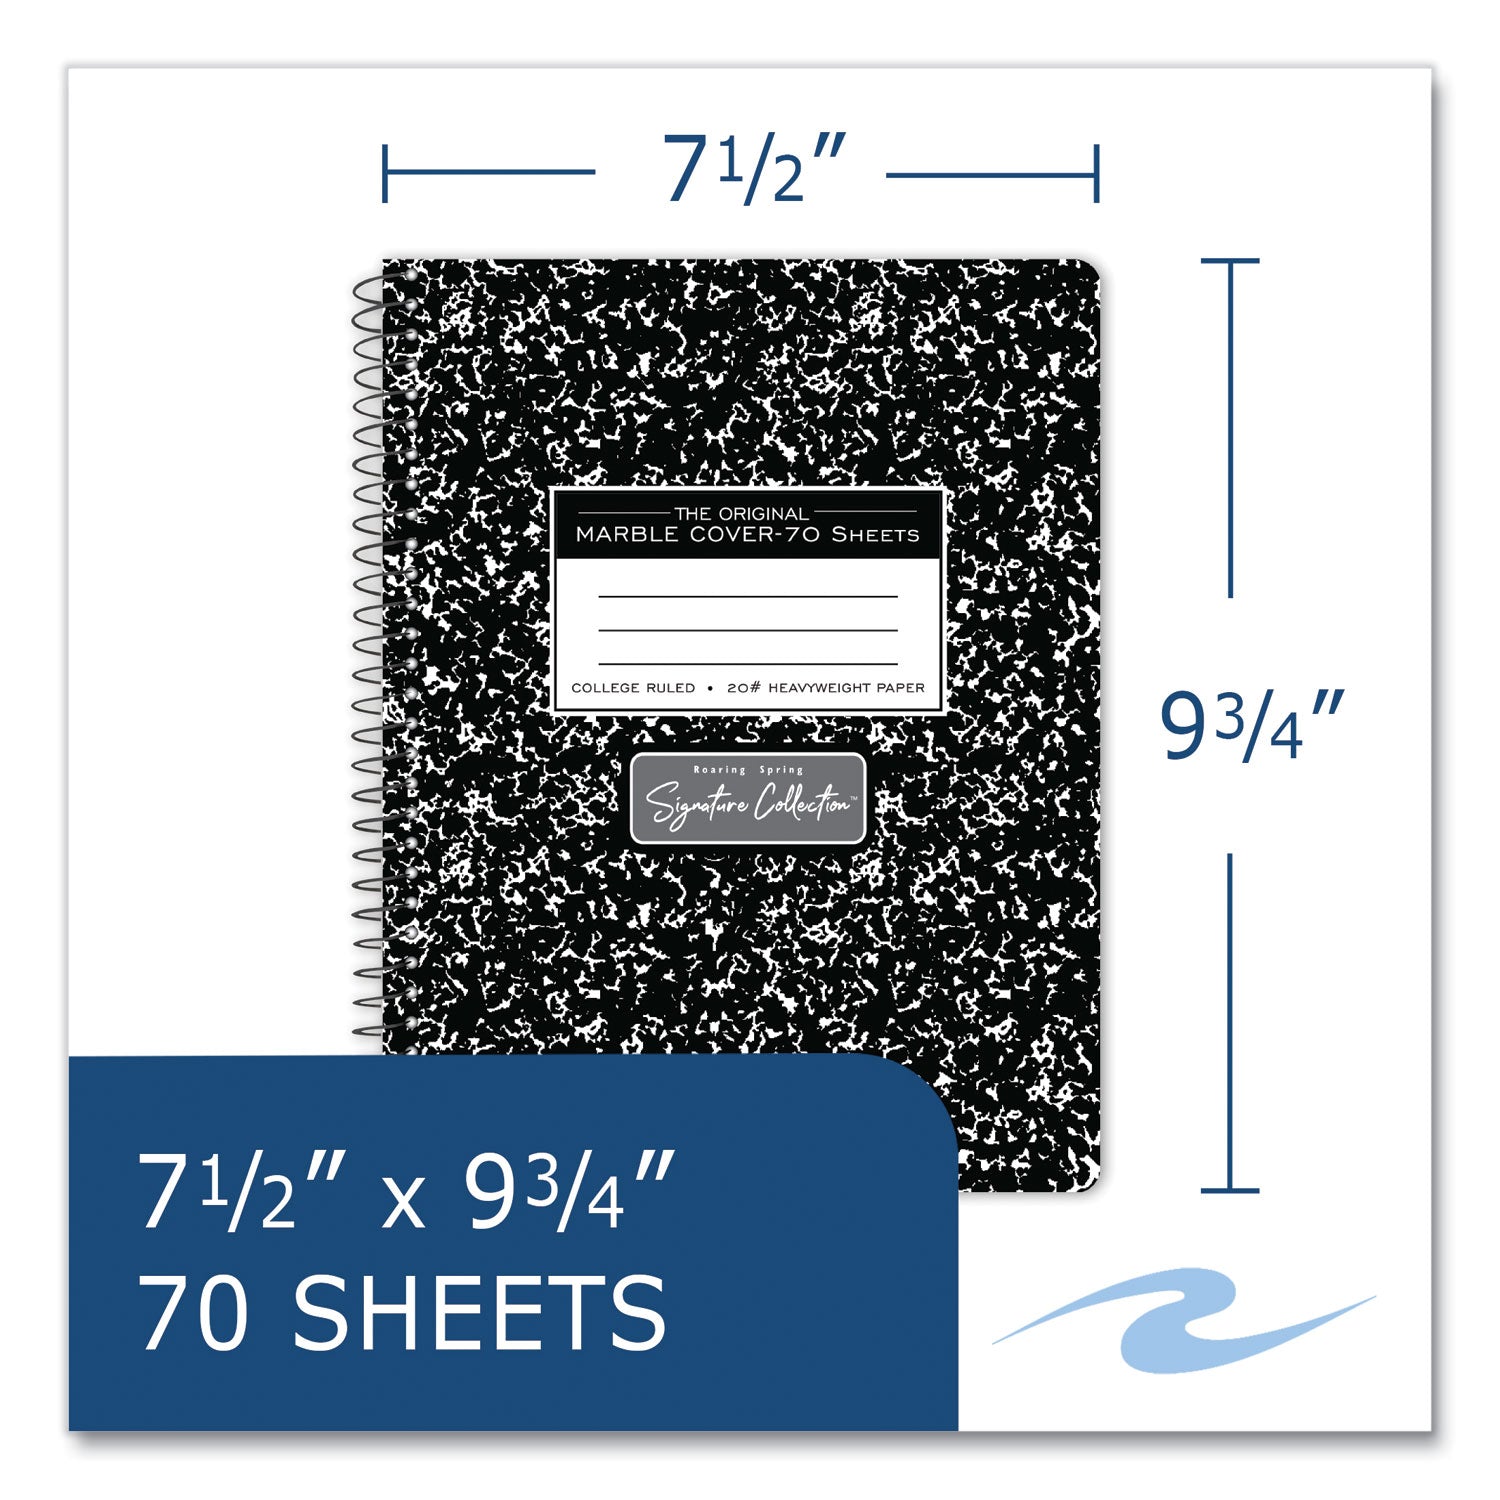 spring-signature-composition-book-med-college-rule-black-marble-cover-70-975-x-75-sheet-24-ct-ships-in-4-6-bus-days_roa10111cs - 2